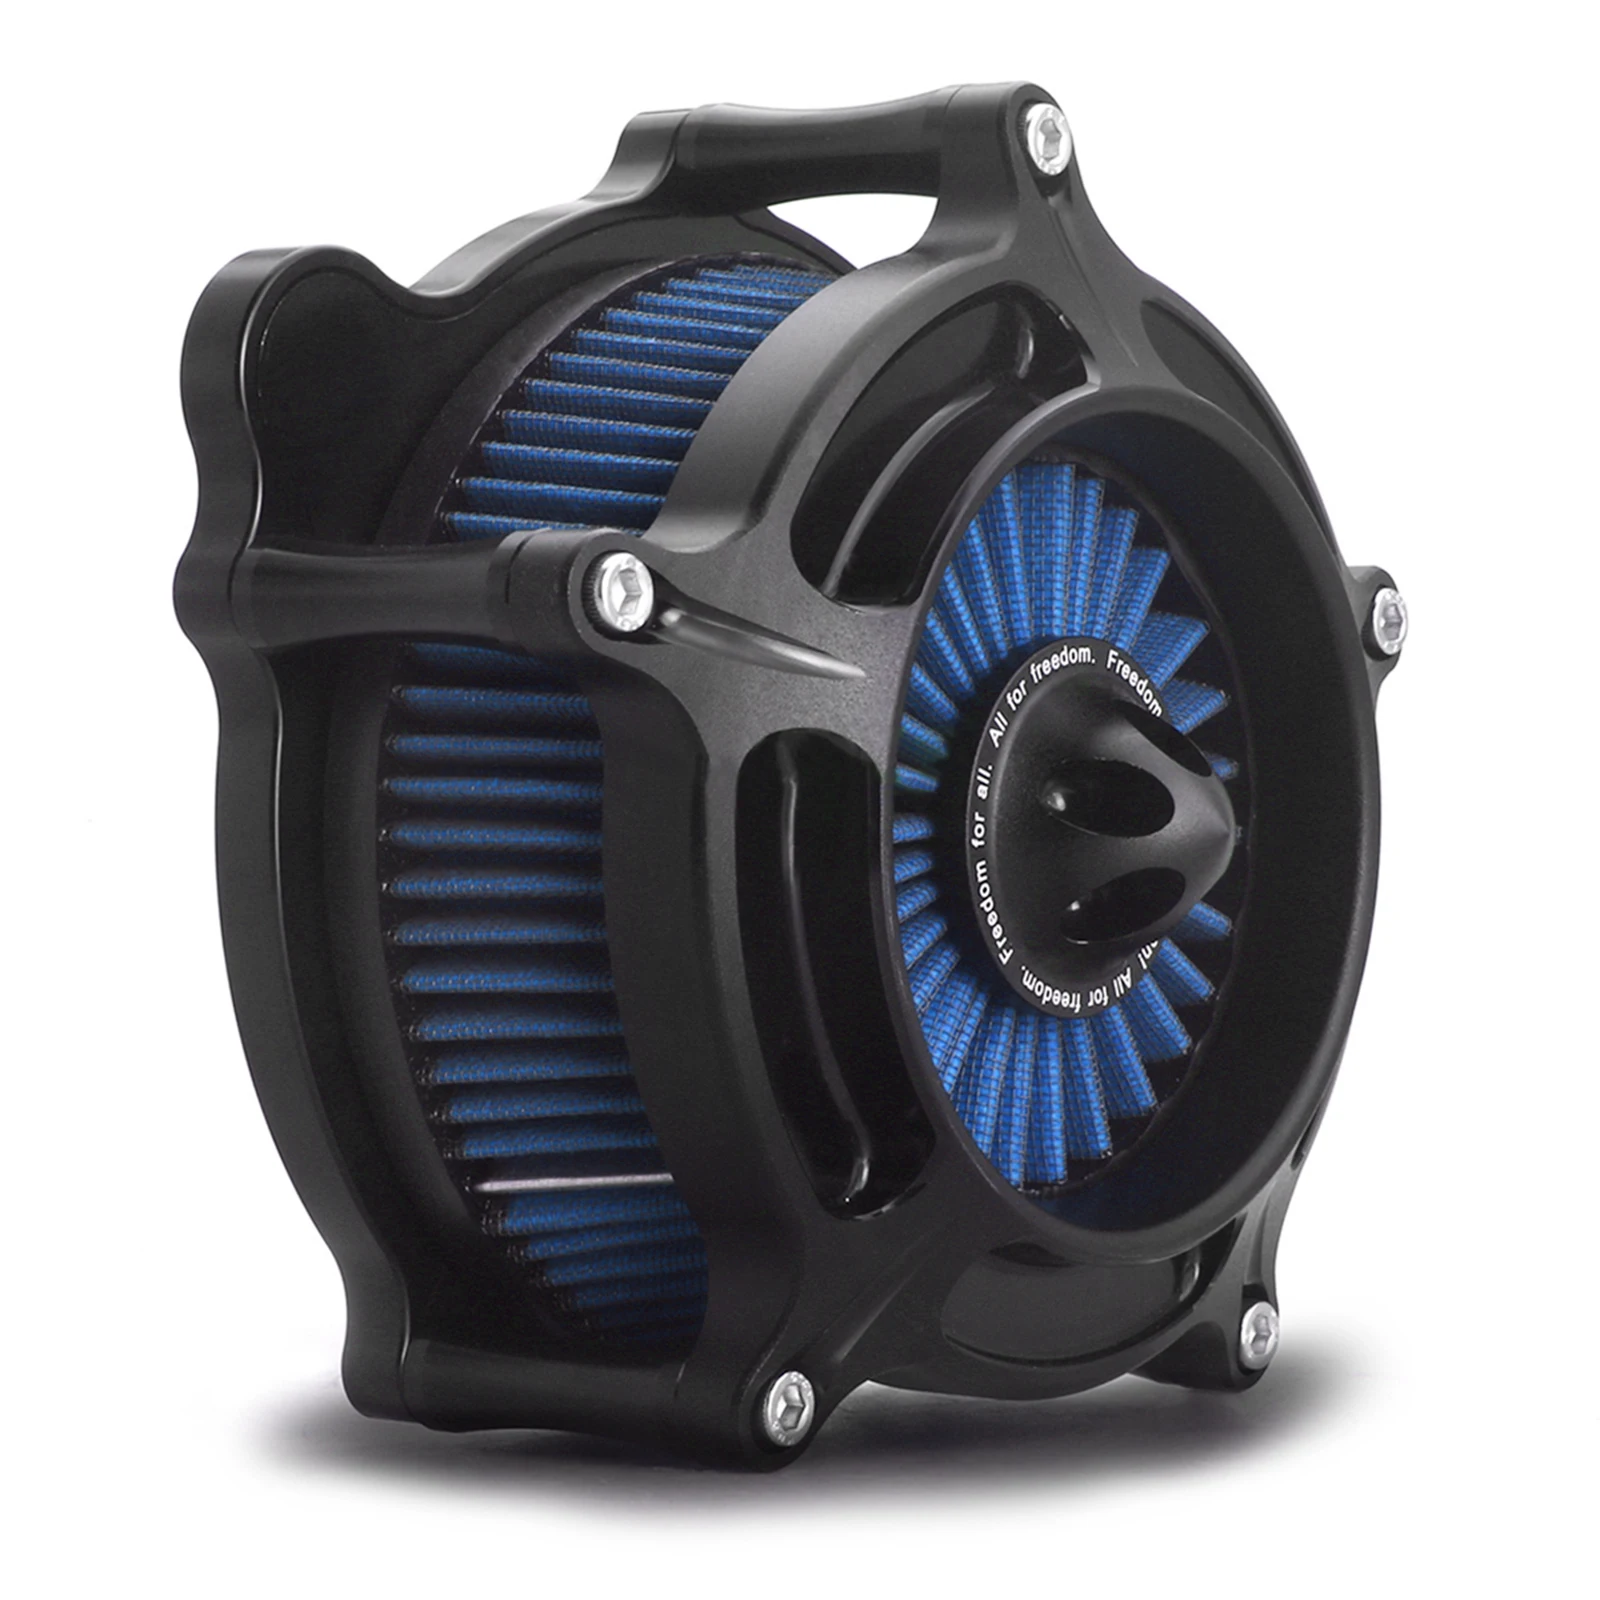 

BLUE Filter element with Black Turbine Air Cleaner intake For Harley Touring Softail Dyna Sportster 1200 883 Forty Eight